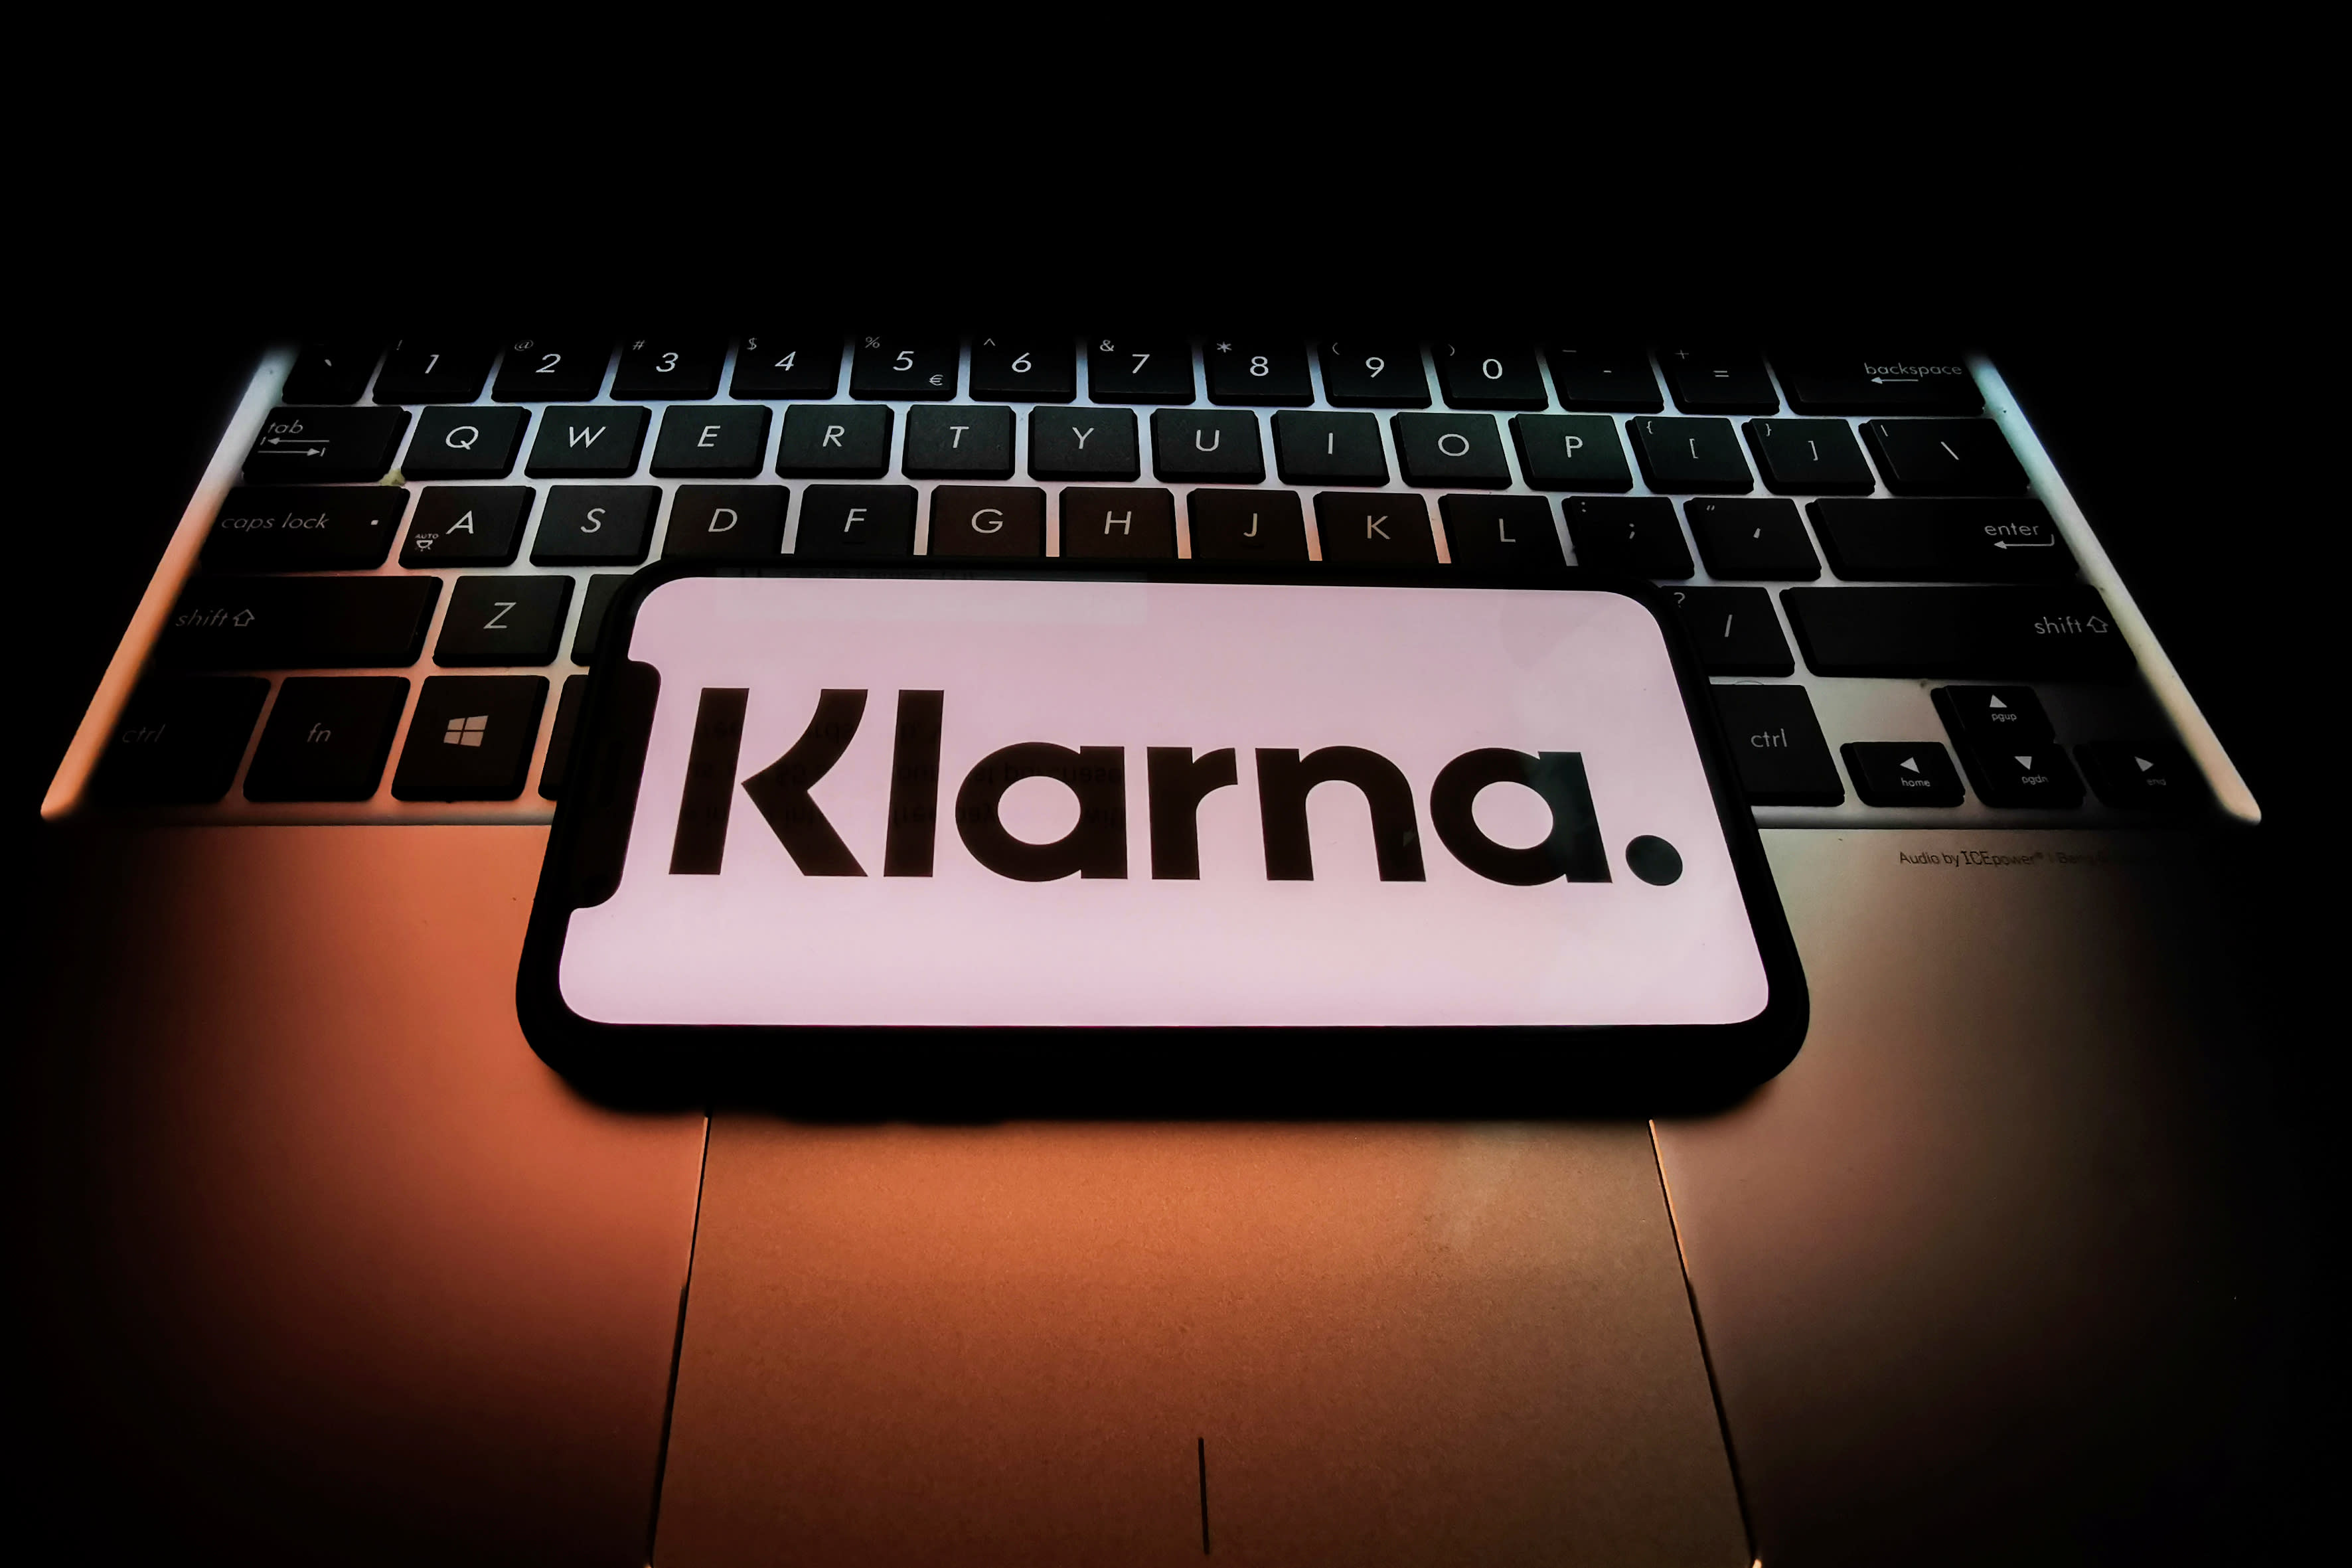 Klarna posts a pre-tax loss of $344M from January to September, up 4x YoY, and says it has 90M+ customers after entering nine markets since the start of 2020 (Ryan Browne/CNBC)